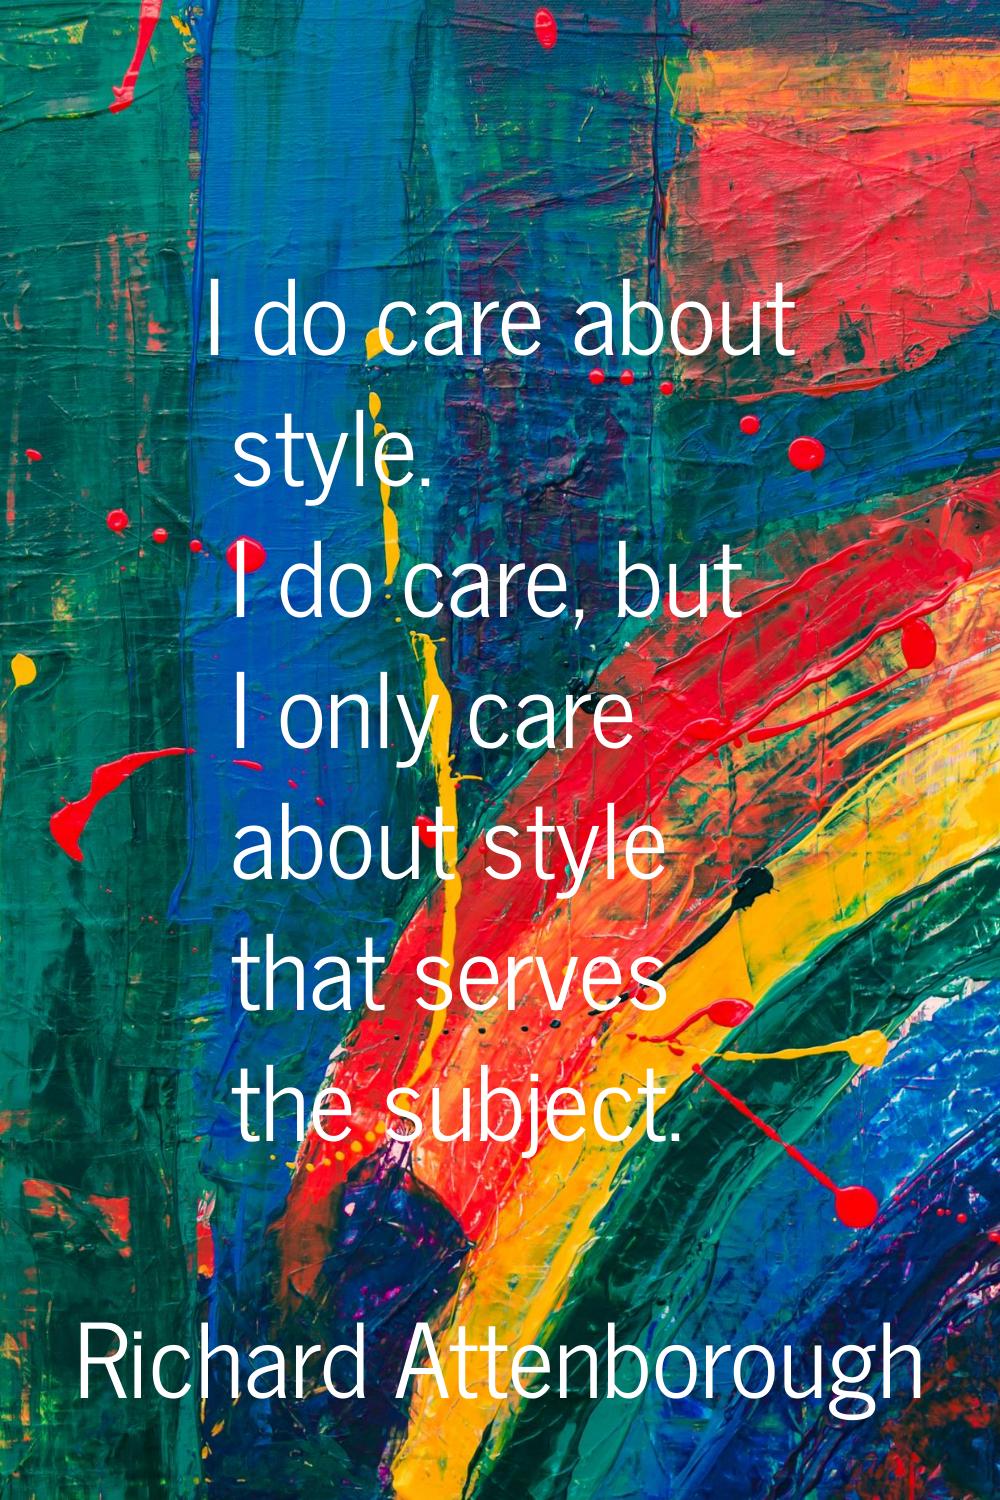 I do care about style. I do care, but I only care about style that serves the subject.